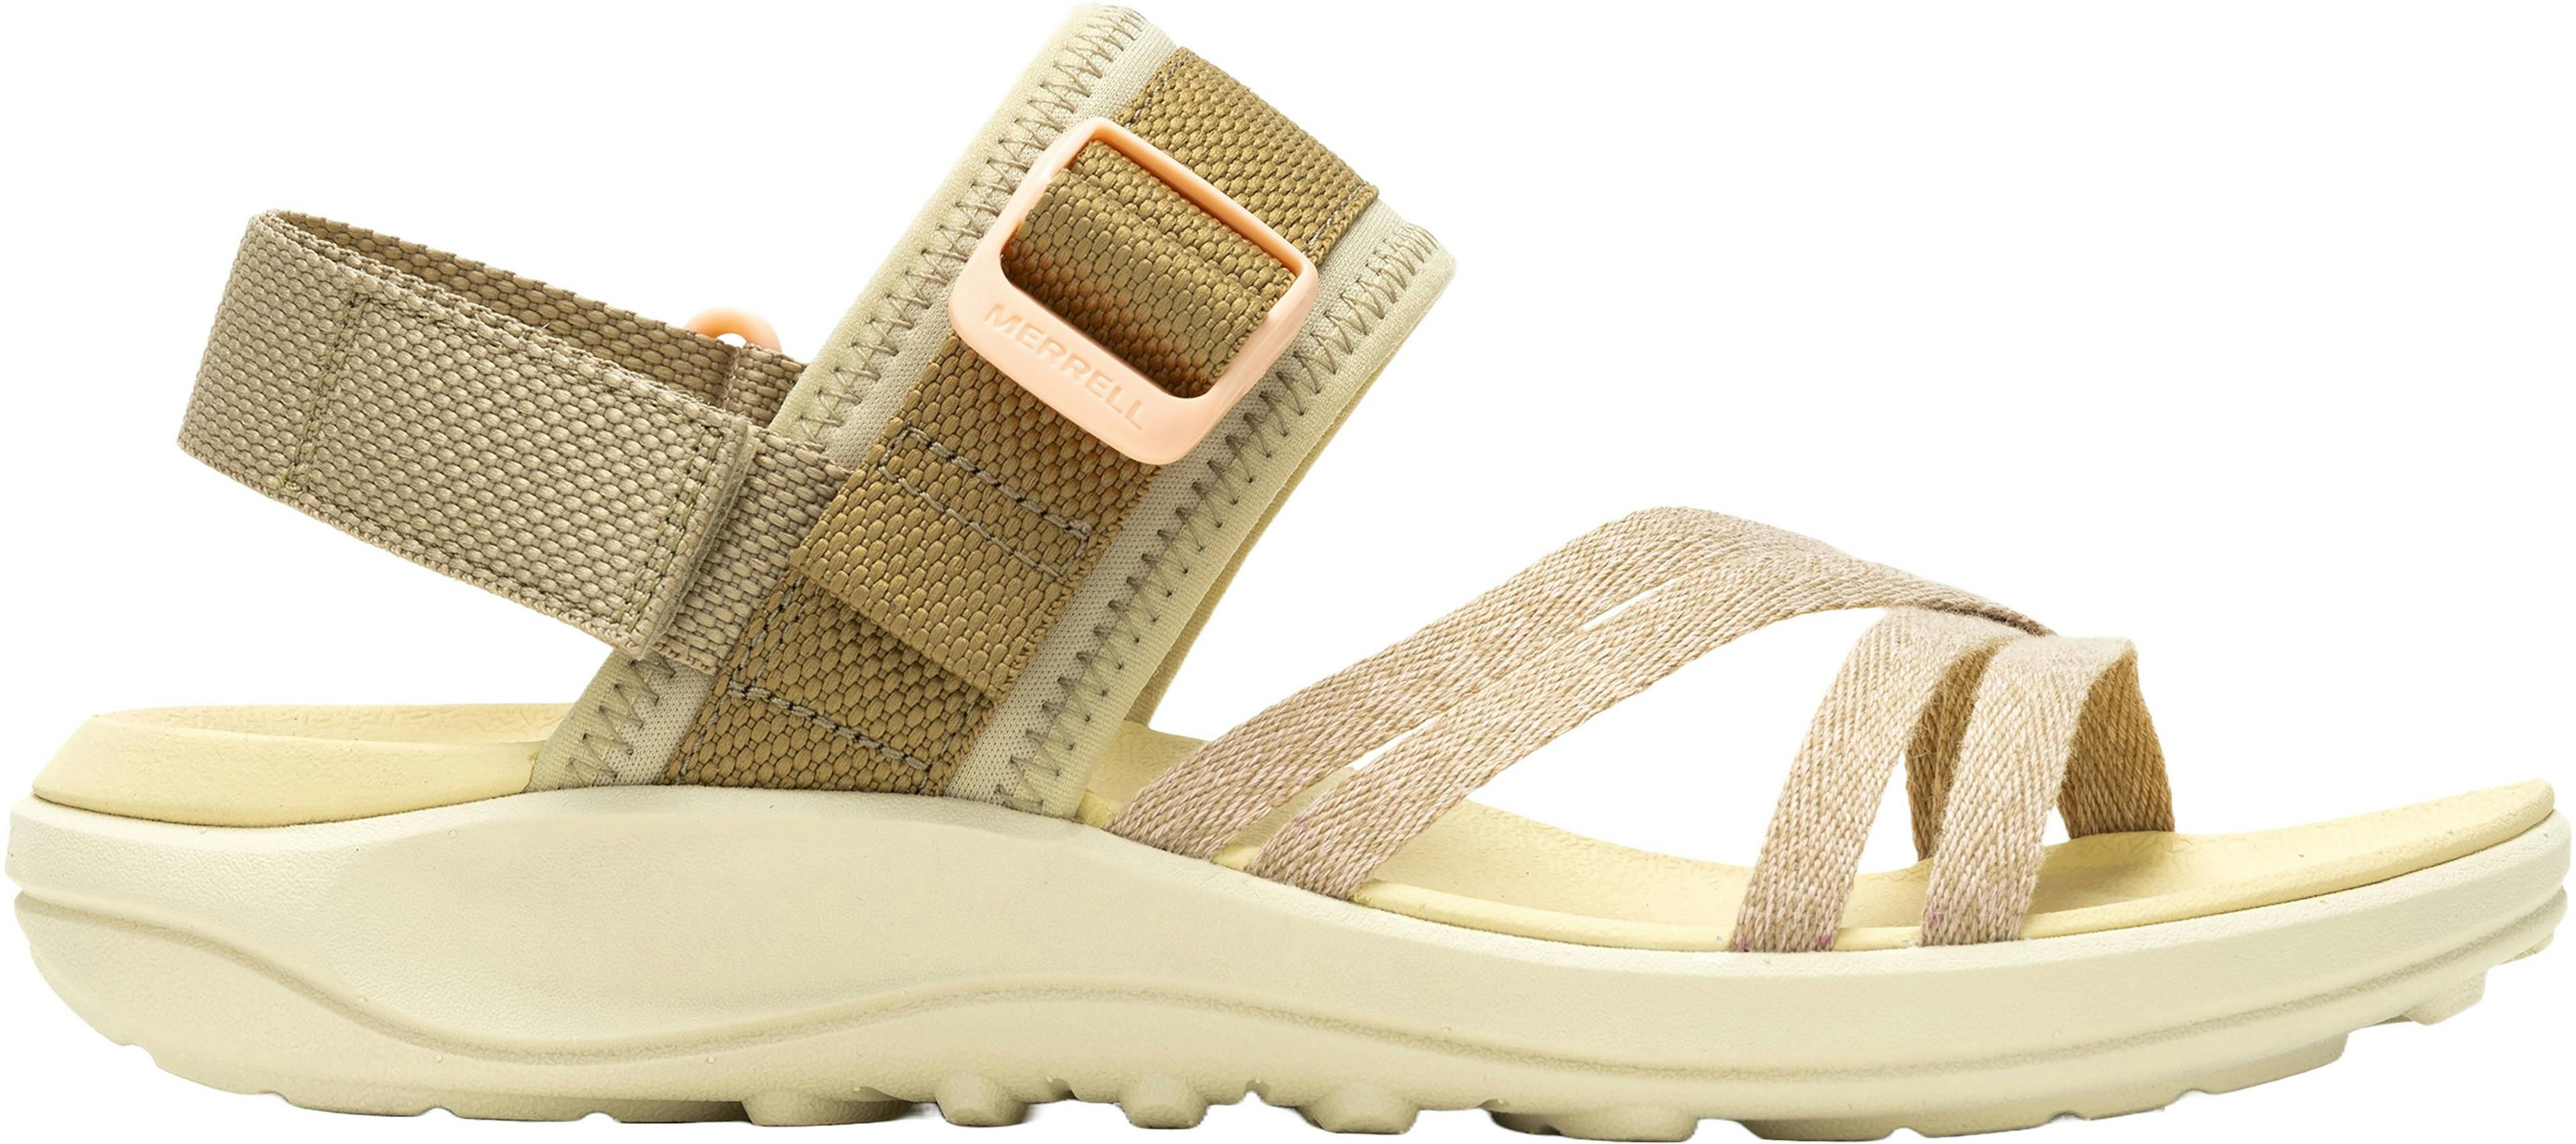 Product image for District 4 Backstrap Sandals - Women's